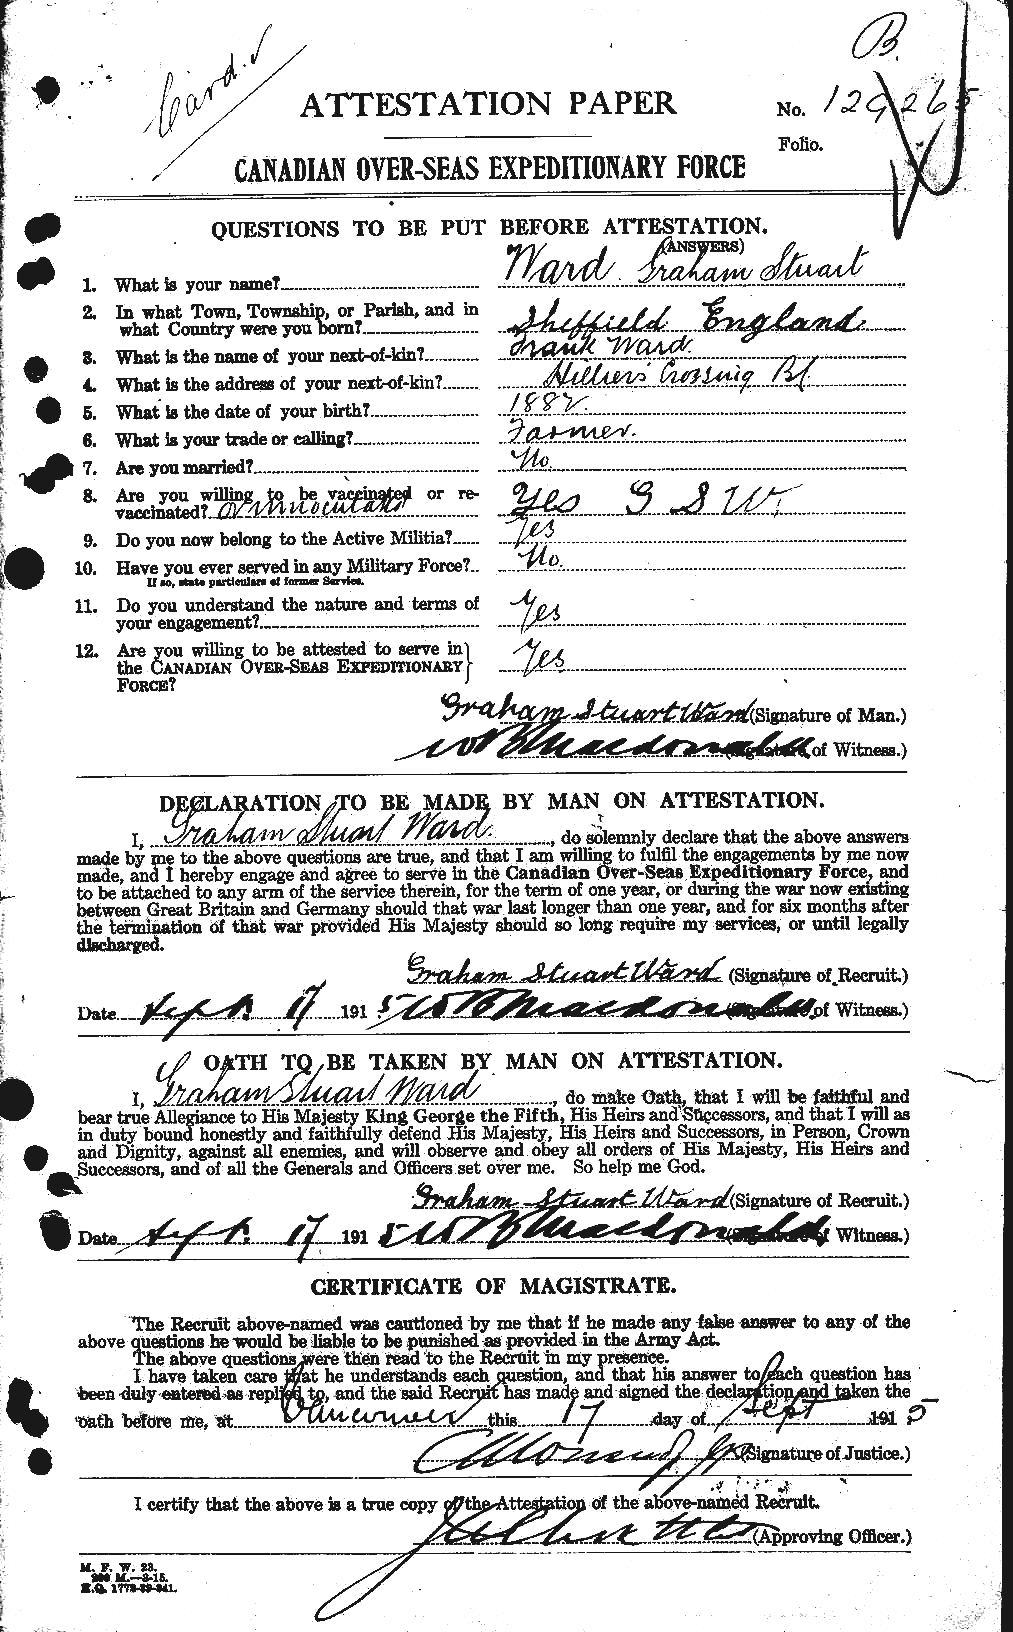 Personnel Records of the First World War - CEF 657790a